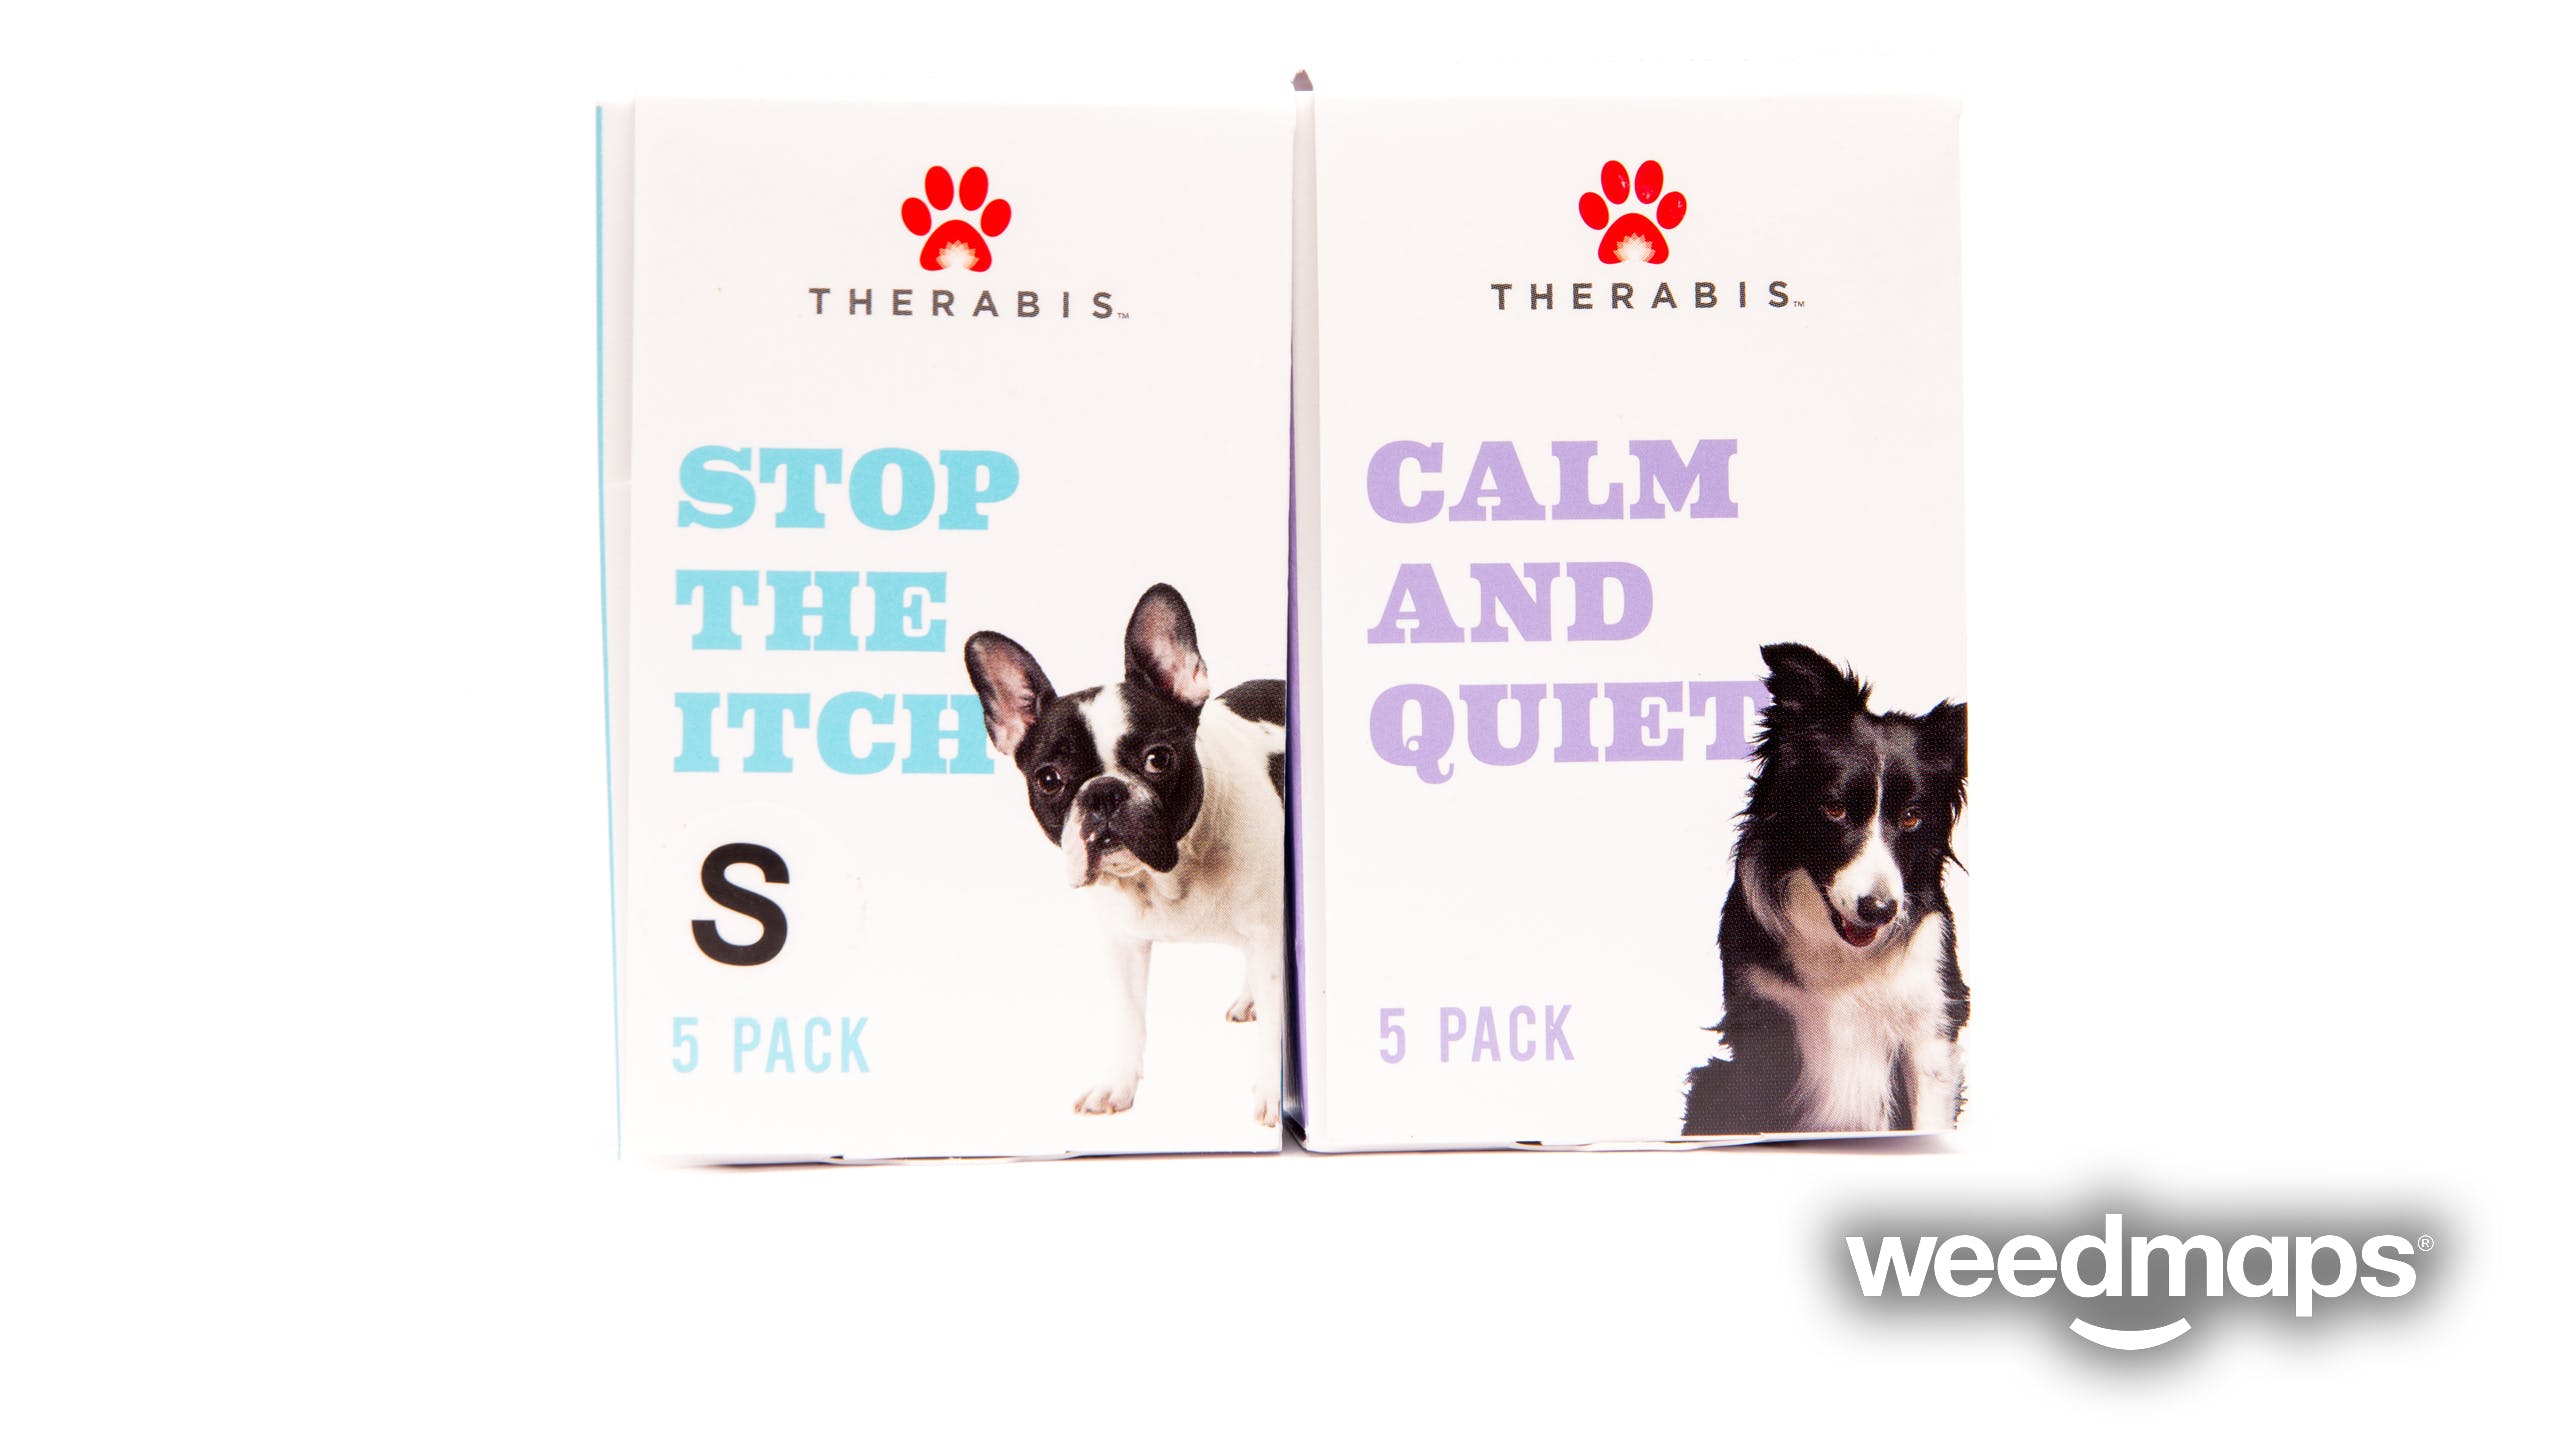 edible-therabis-30-pack-cbd-dog-treats-large-dogs